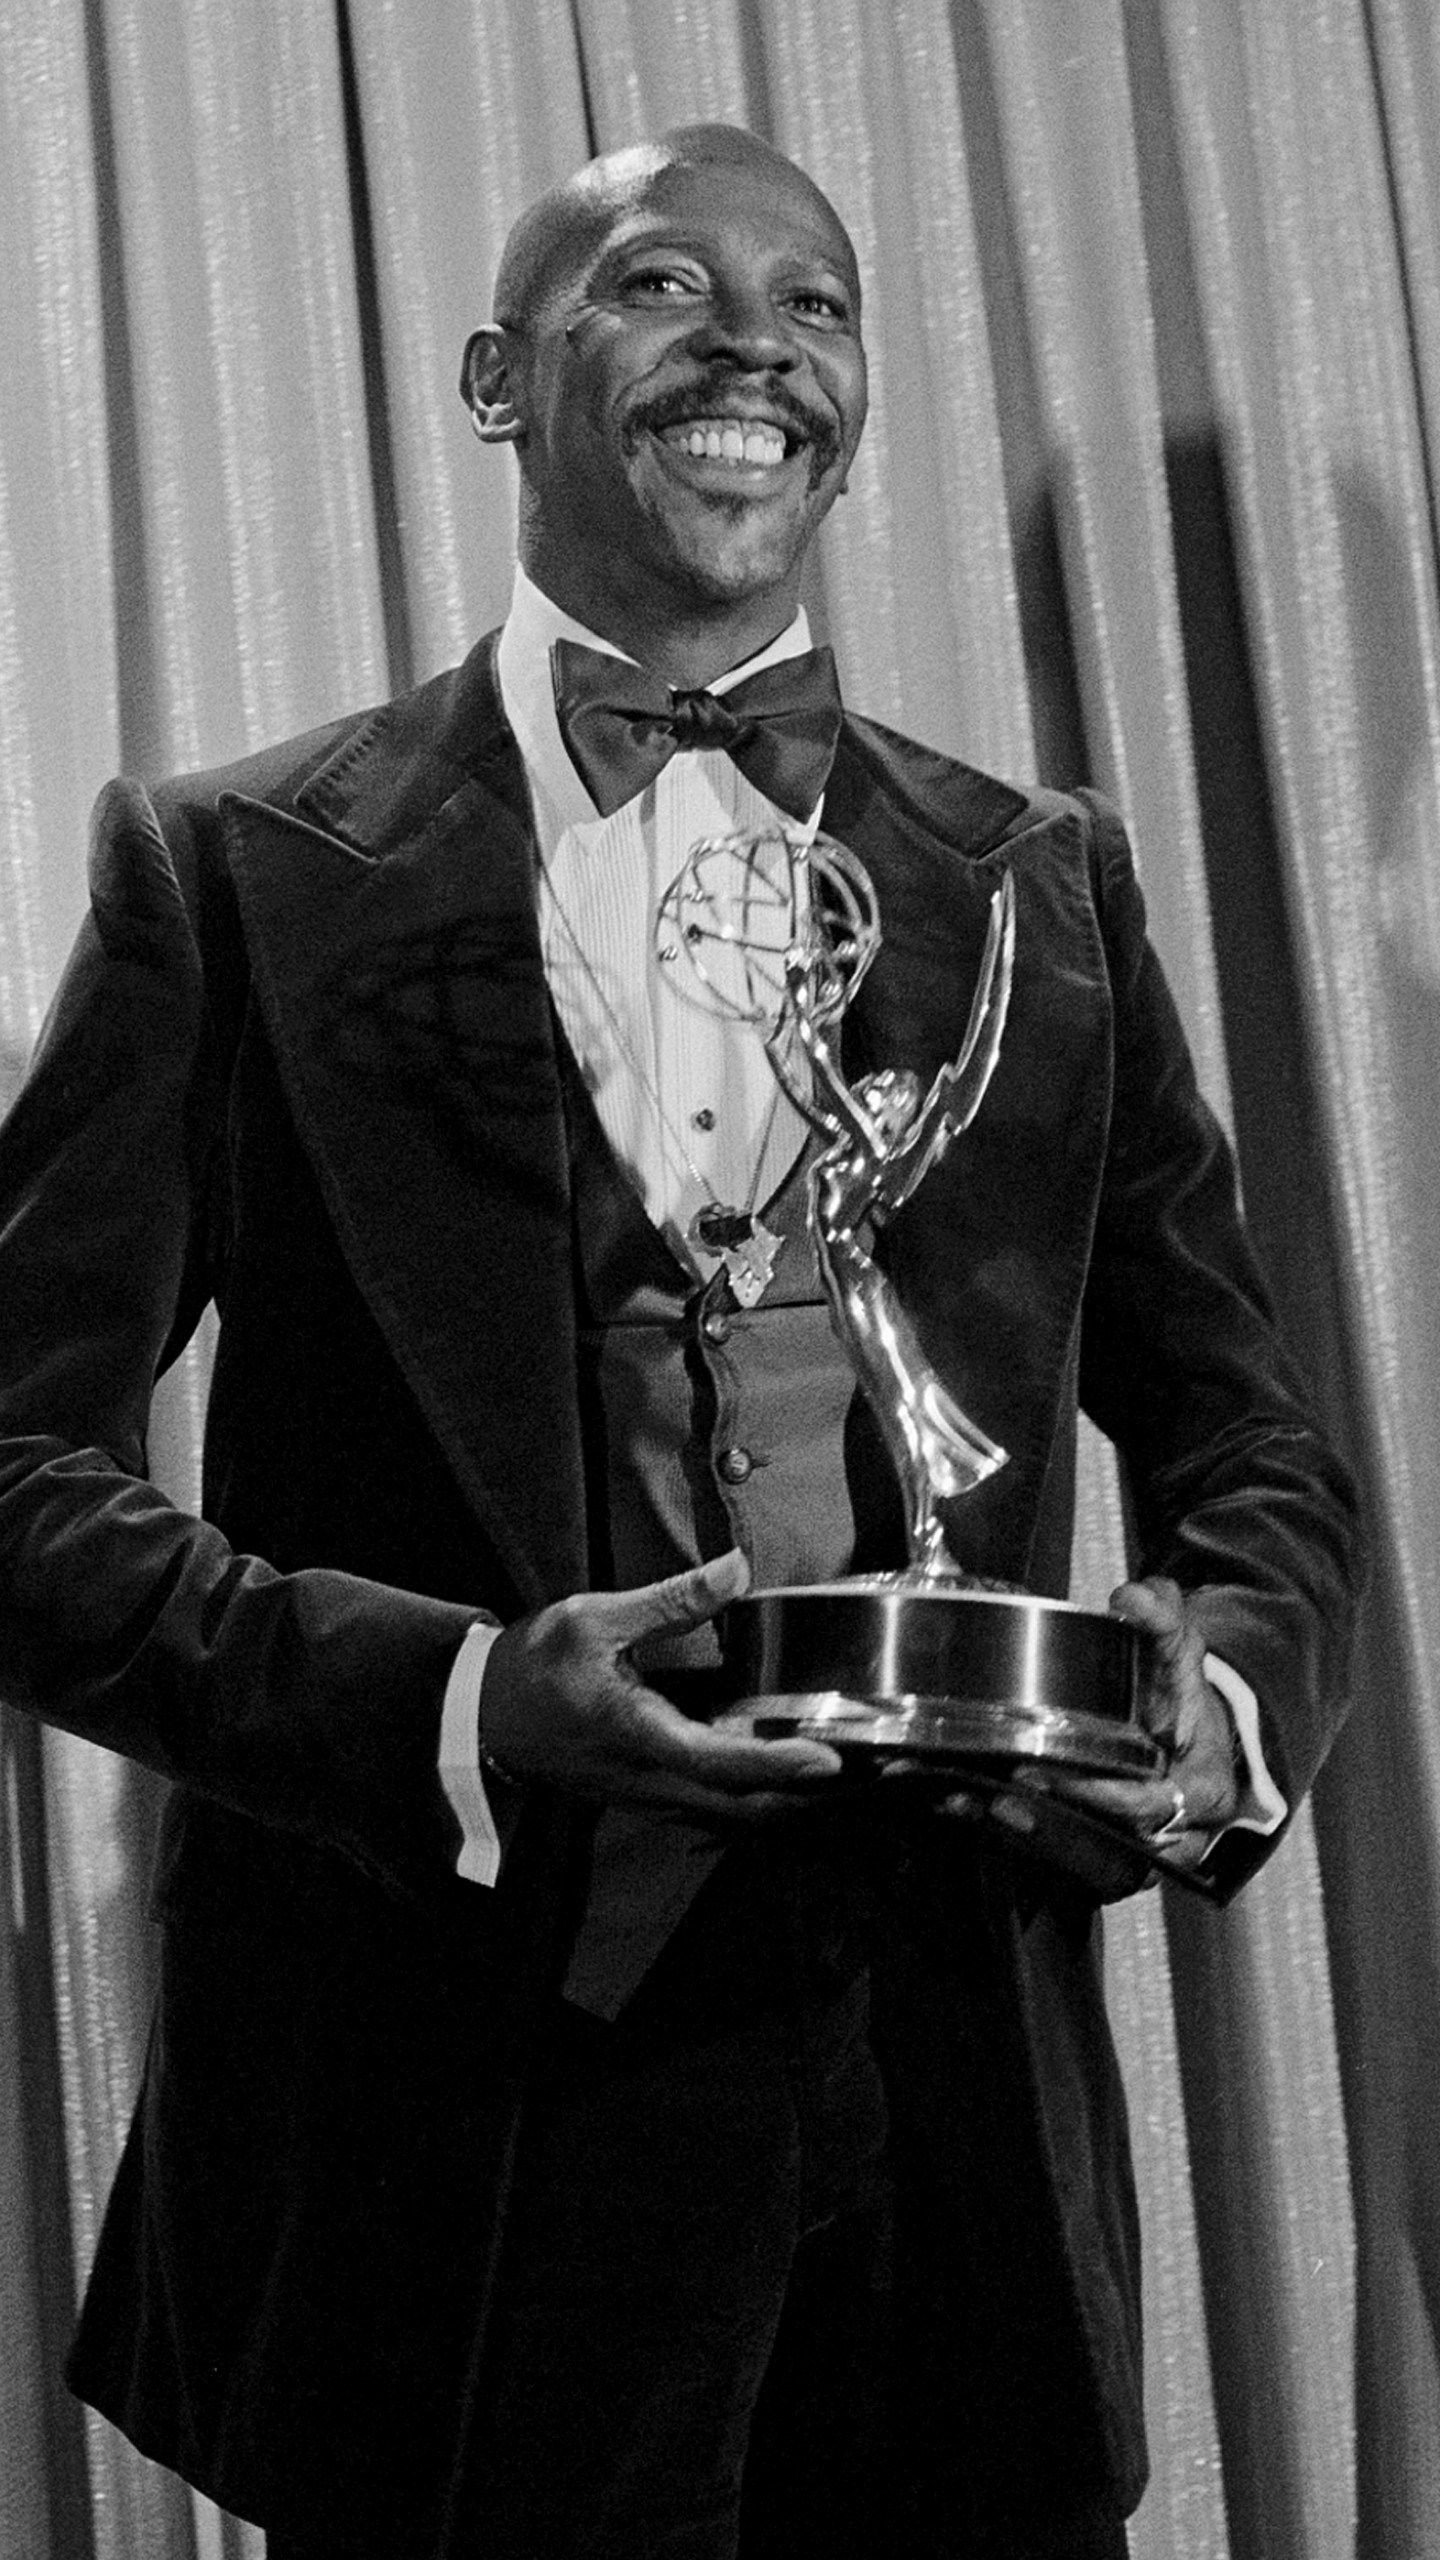 FILE - Louis Gossett Jr., poses with the Emmy he received for his role in the TV drama "Roots," at the Academy of Television, Arts and Sciences awards show in Los Angeles on Sept. 11, 1977. Gossett Jr., the first Black man to win a supporting actor Oscar and an Emmy winner for his role in the seminal TV miniseries “Roots,” has died. He was 87. (AP Photo, File)